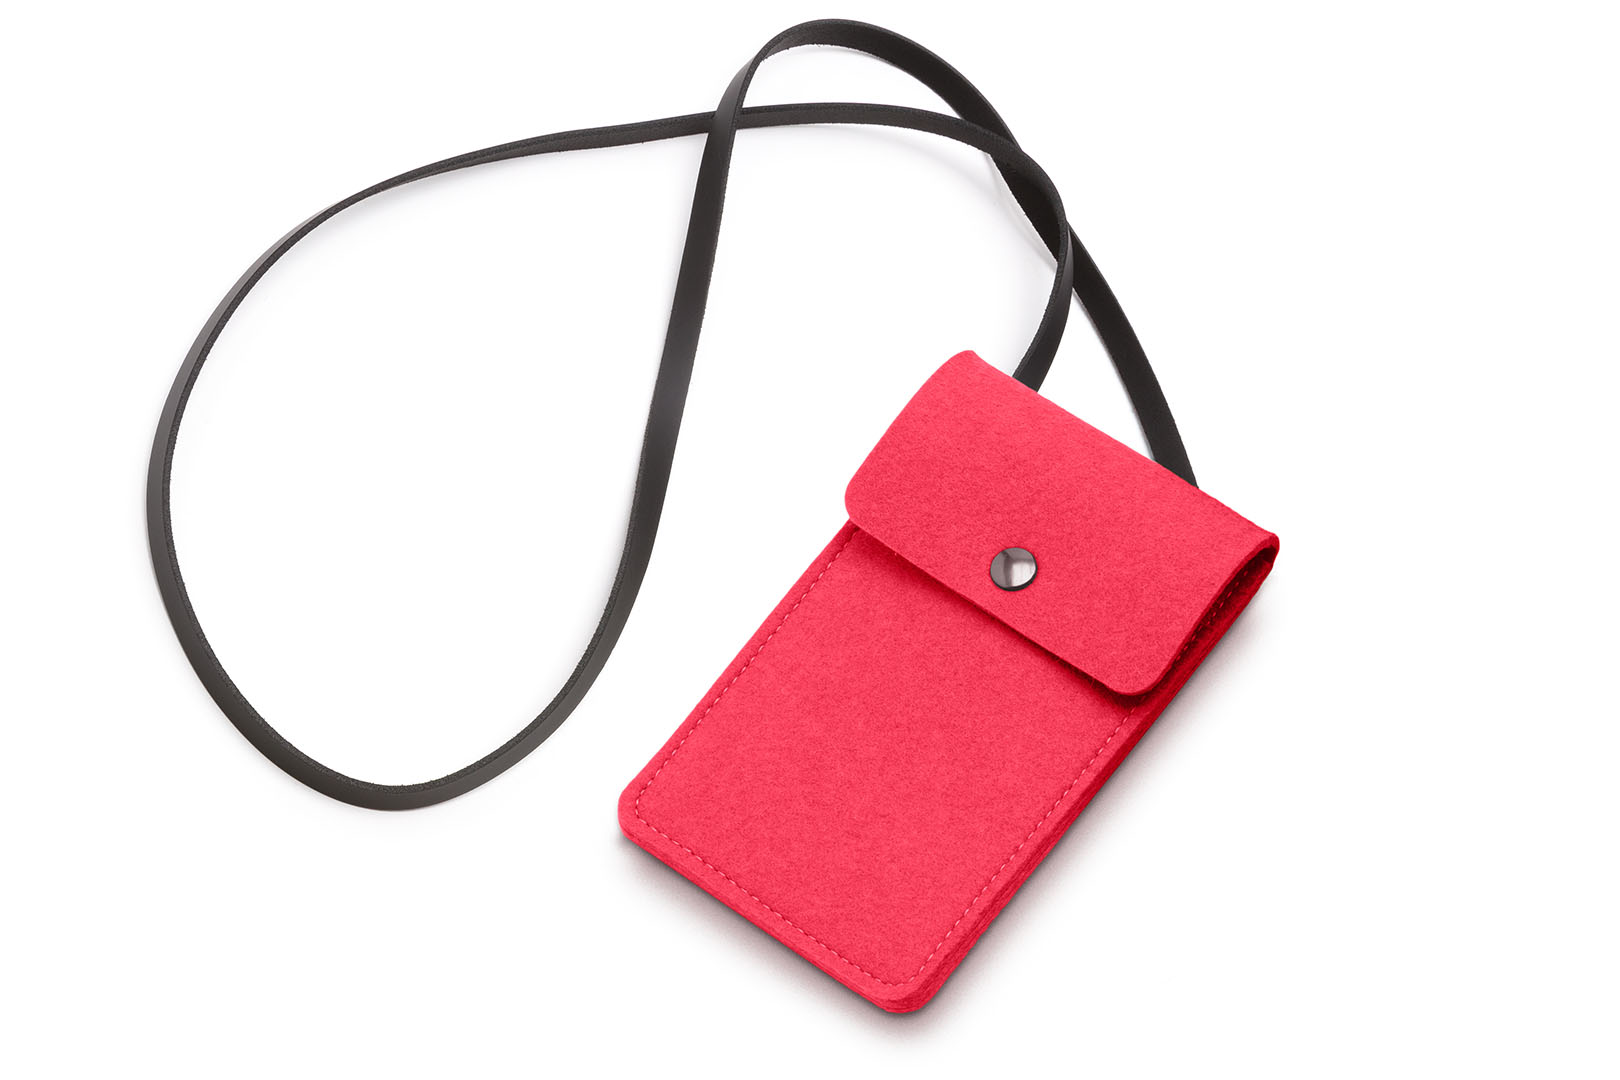 HEY-Sign Smart Bag in der Farbe "Coral"